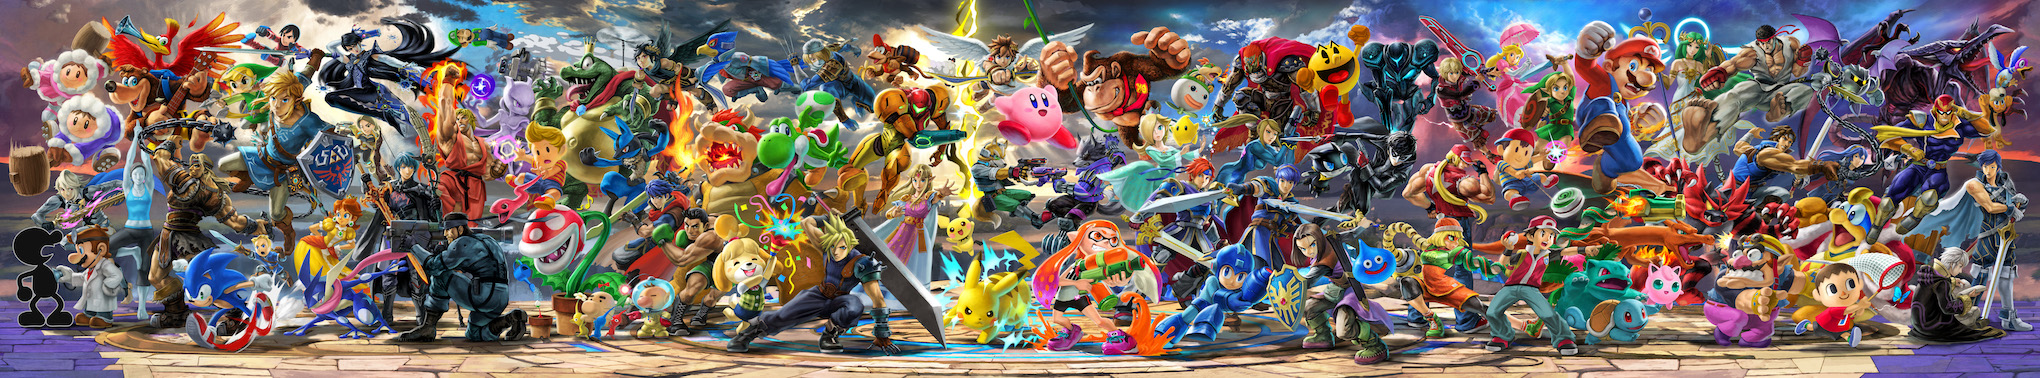 The Super Smash Bros. Ultimate panoramic artwork, with Min Min added after her reveal trailer.